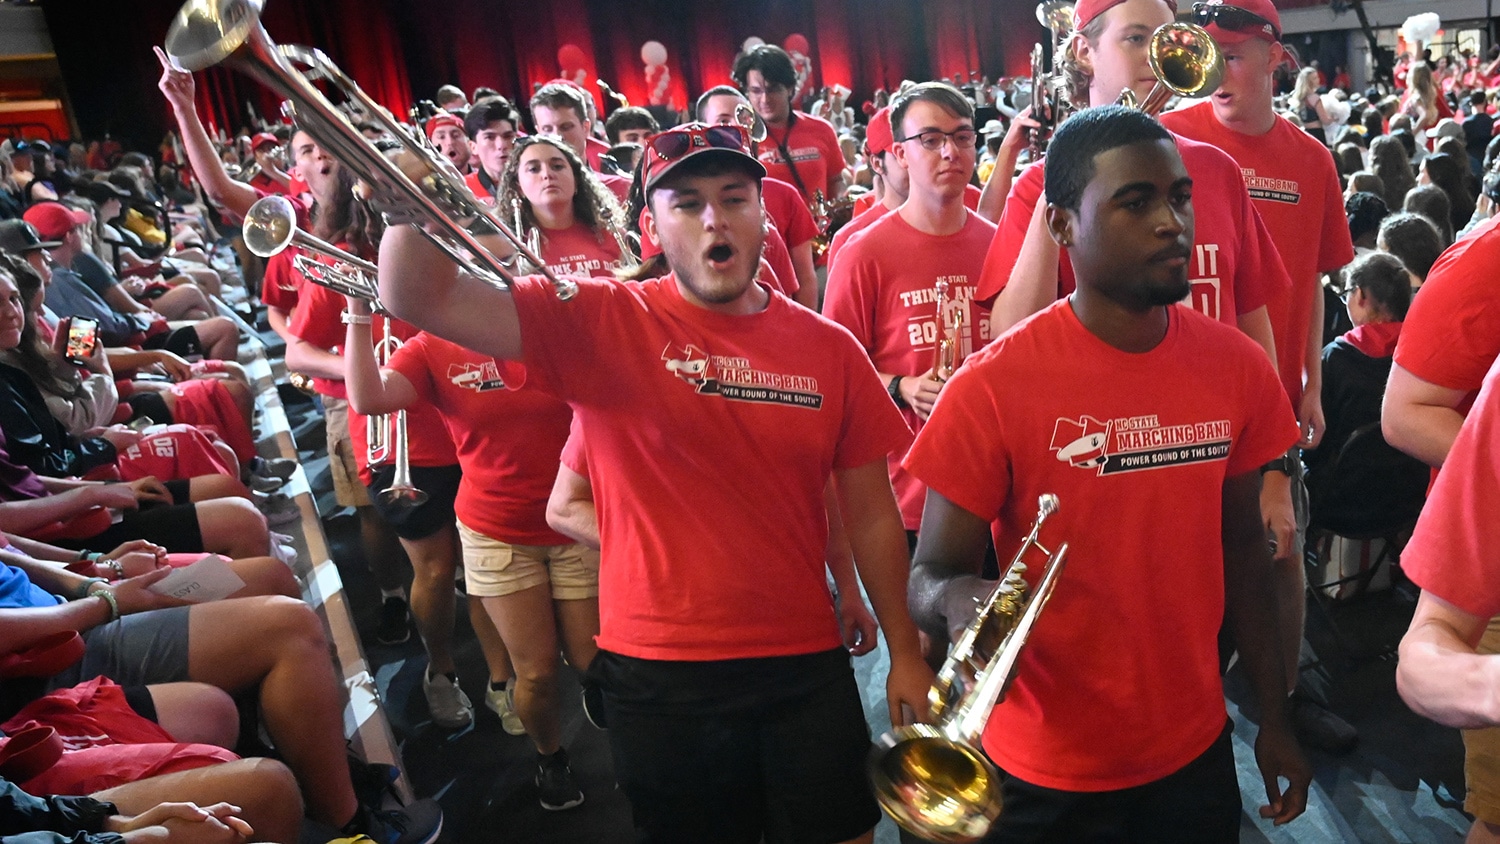 Members of the marching band march into Reynolds Coliseum wearing branded Power Sound of the South T-shirts.